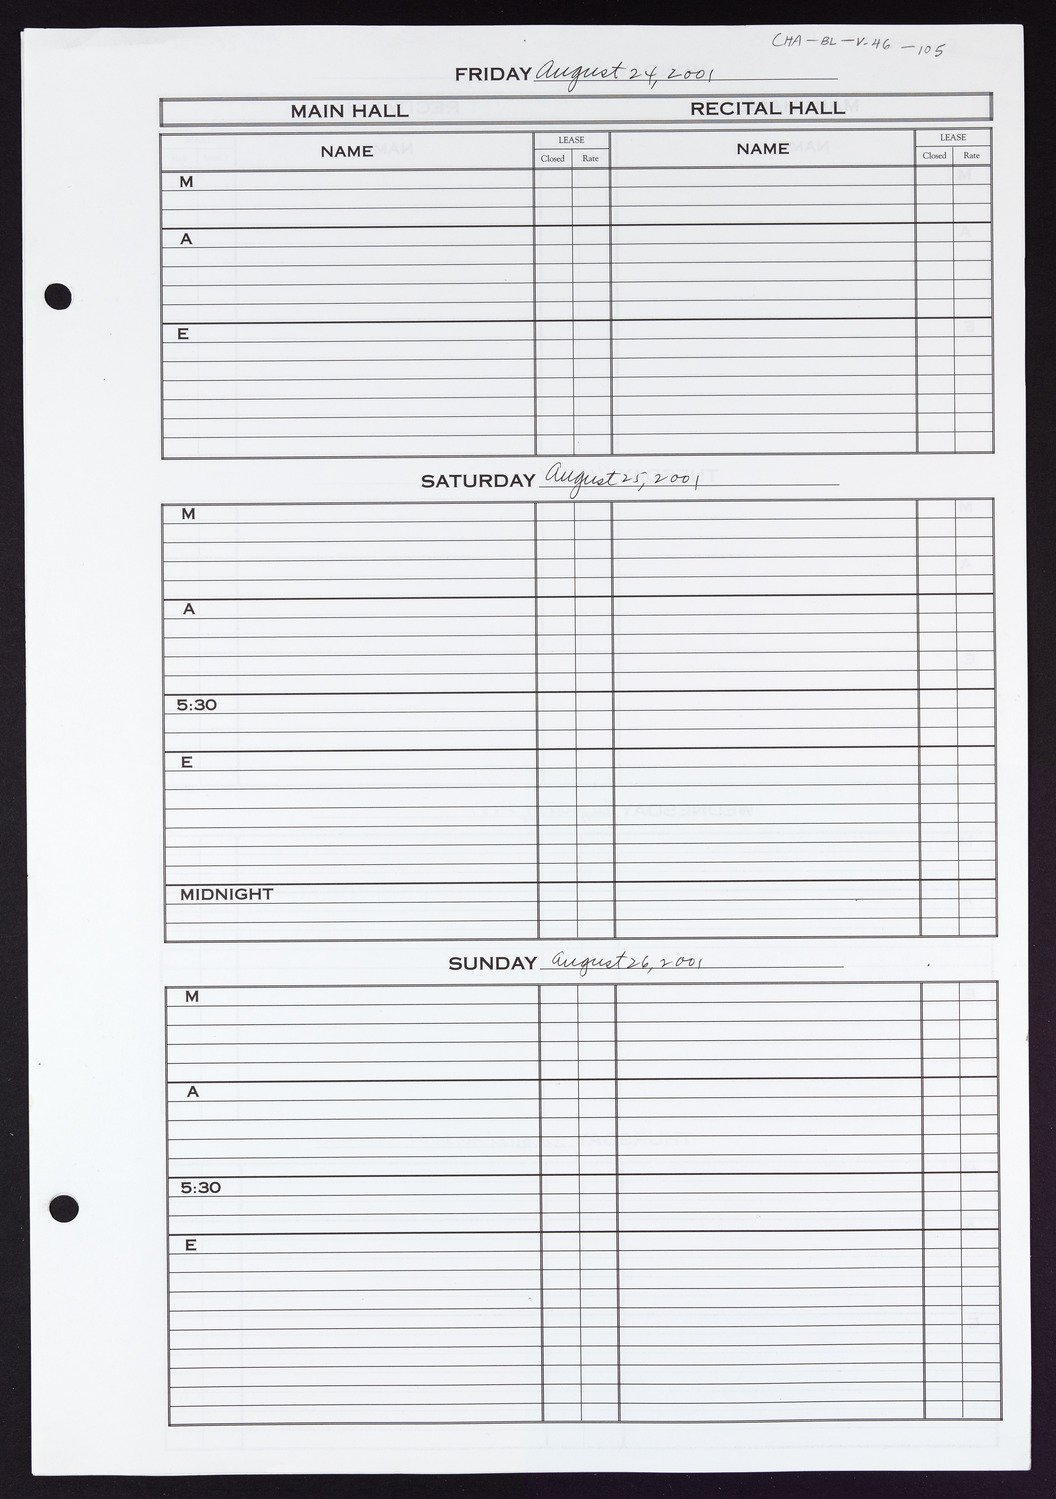 Carnegie Hall Booking Ledger, volume 46, page 105